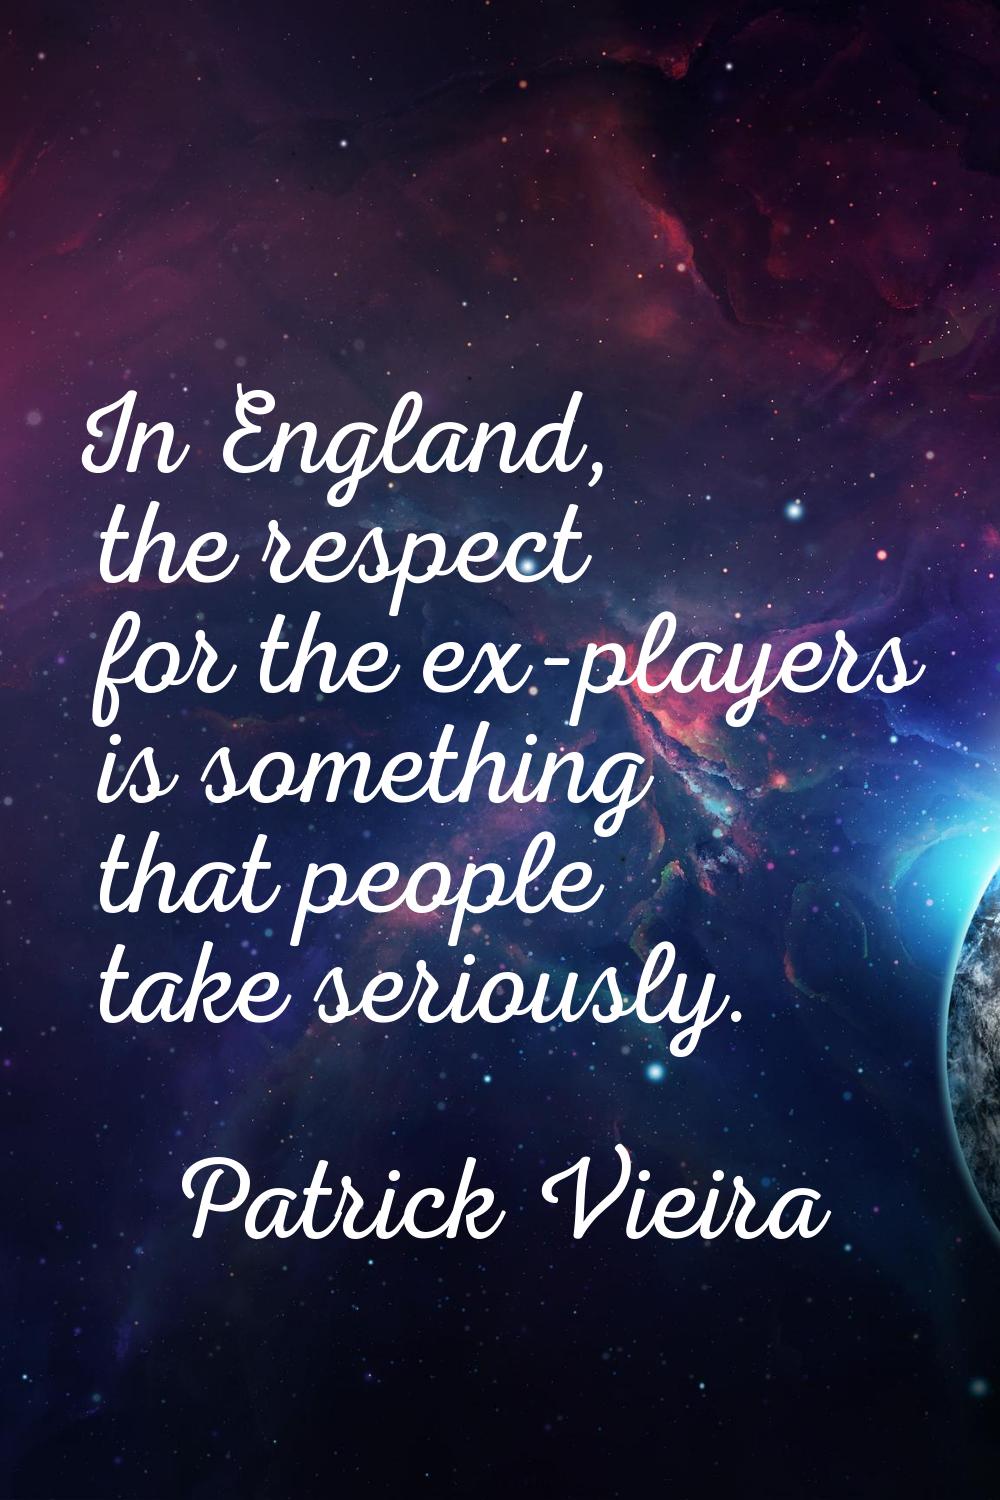 In England, the respect for the ex-players is something that people take seriously.